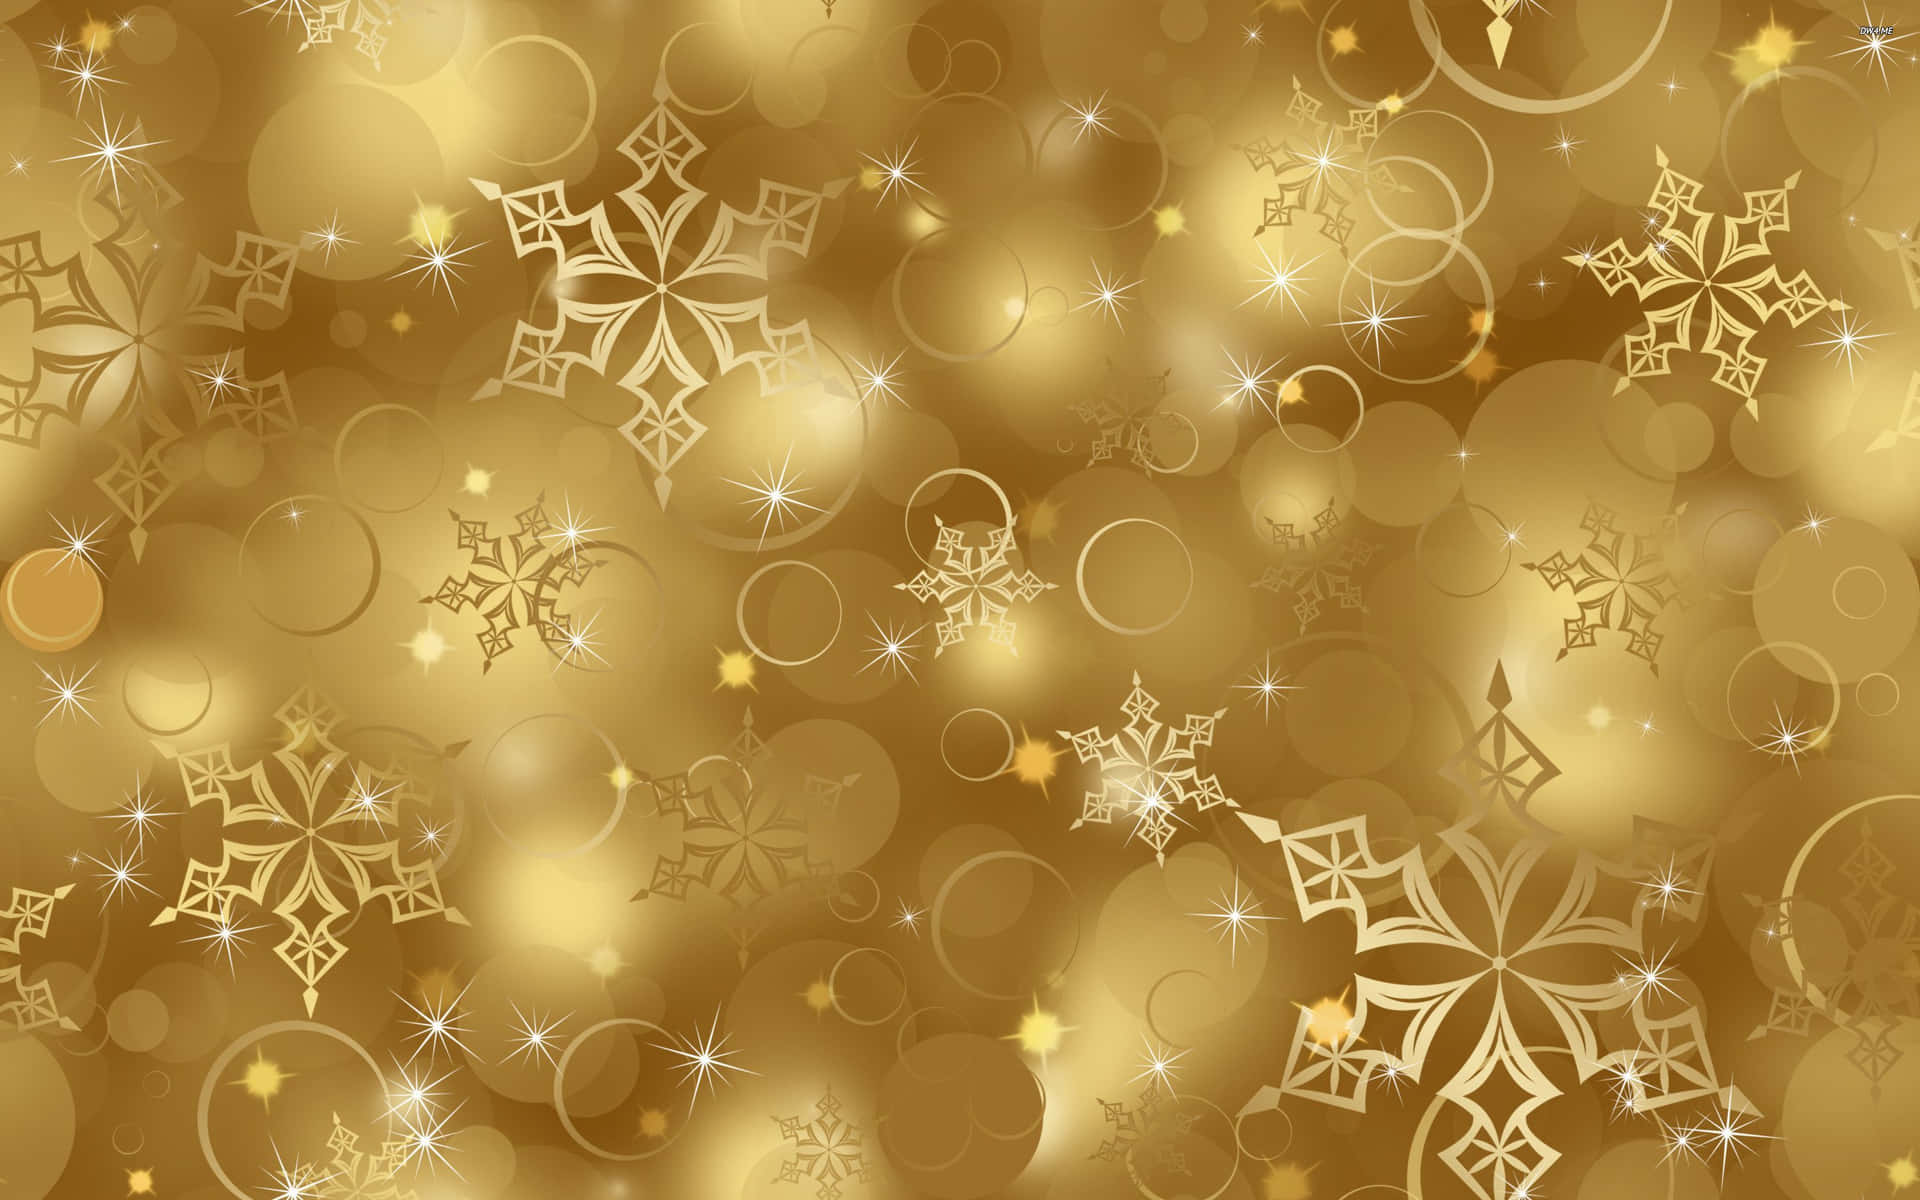 Celebrate Christmas Joyfully with Gold-themed Decorations Wallpaper